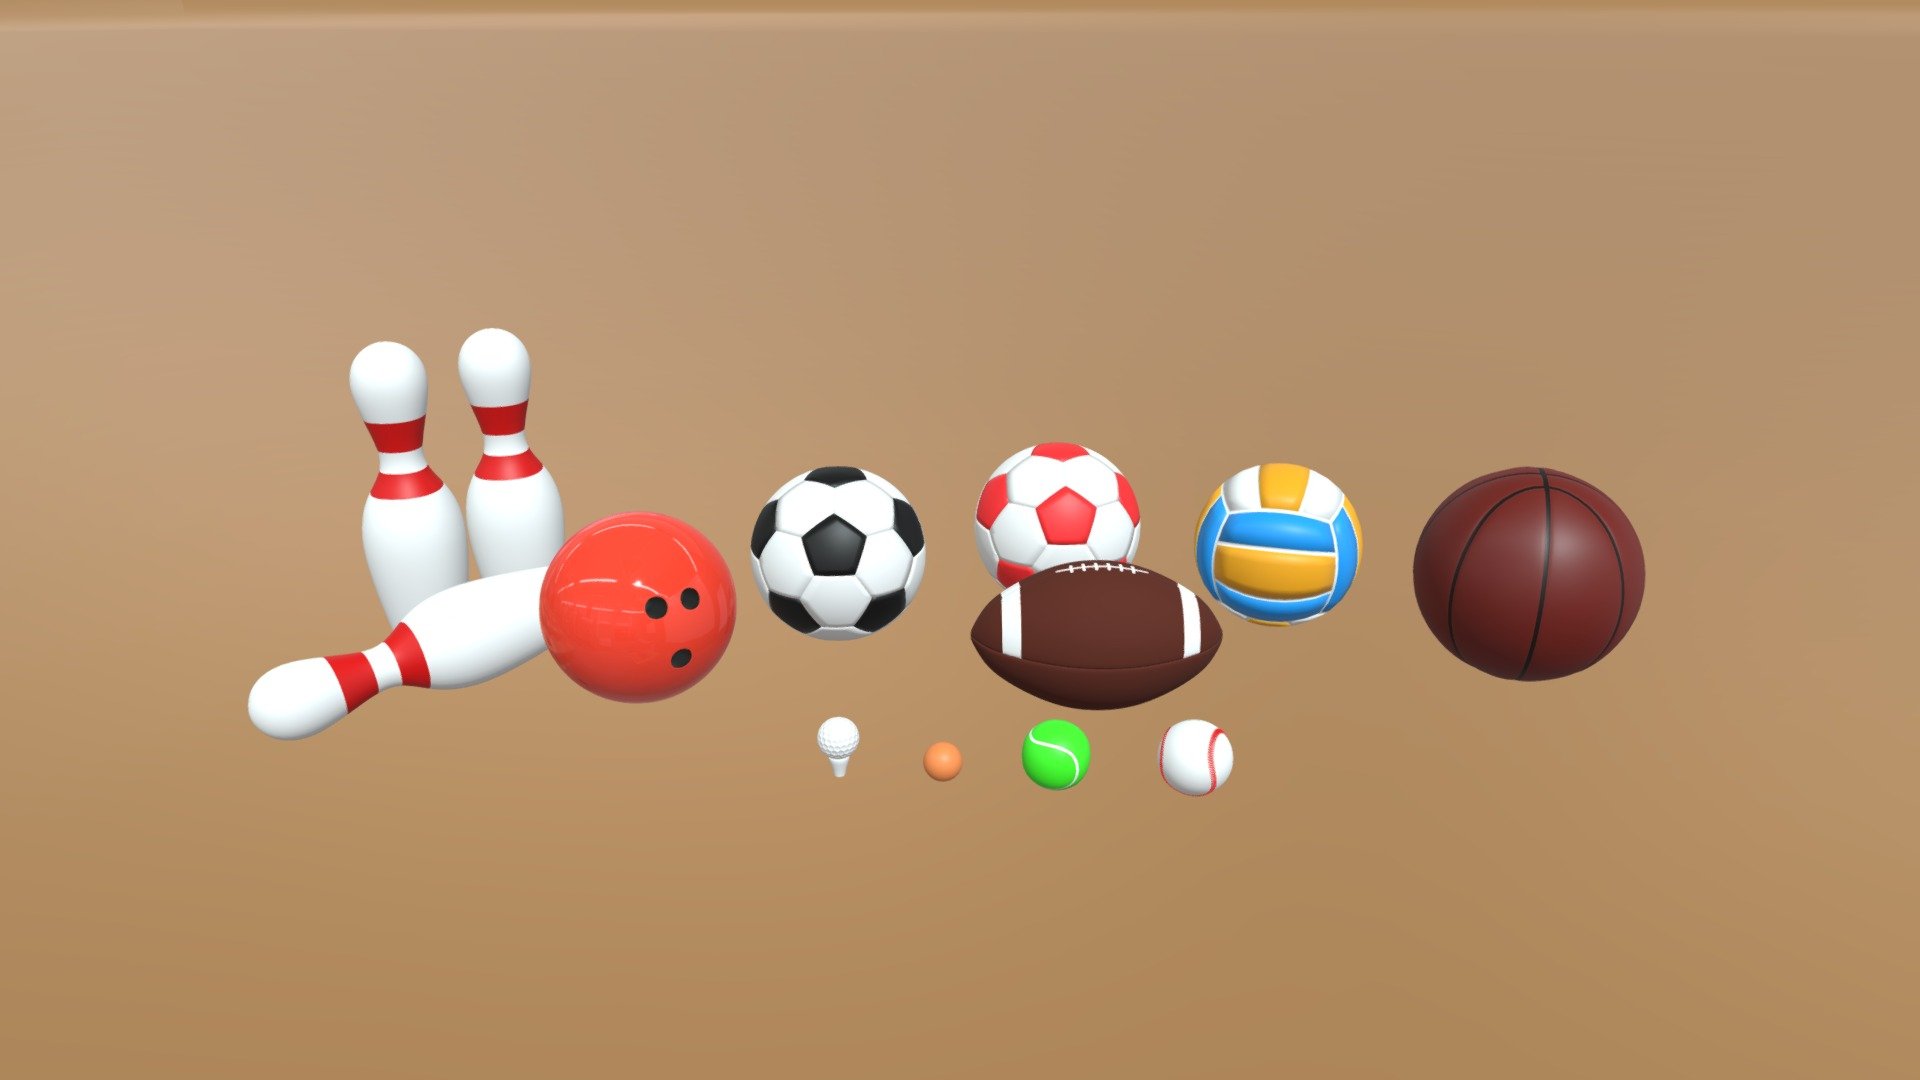 -Sport Balls Collection.

-This product contains 14 models.

-This product was created in Blender 2.8.

-vertices: 86,421 , polygons: 89,204.

-Formats: blend, fbx, obj, c4d, dae, fbx,unitypackage.

-I hope you enjoy this model.

-Thank you 3d model